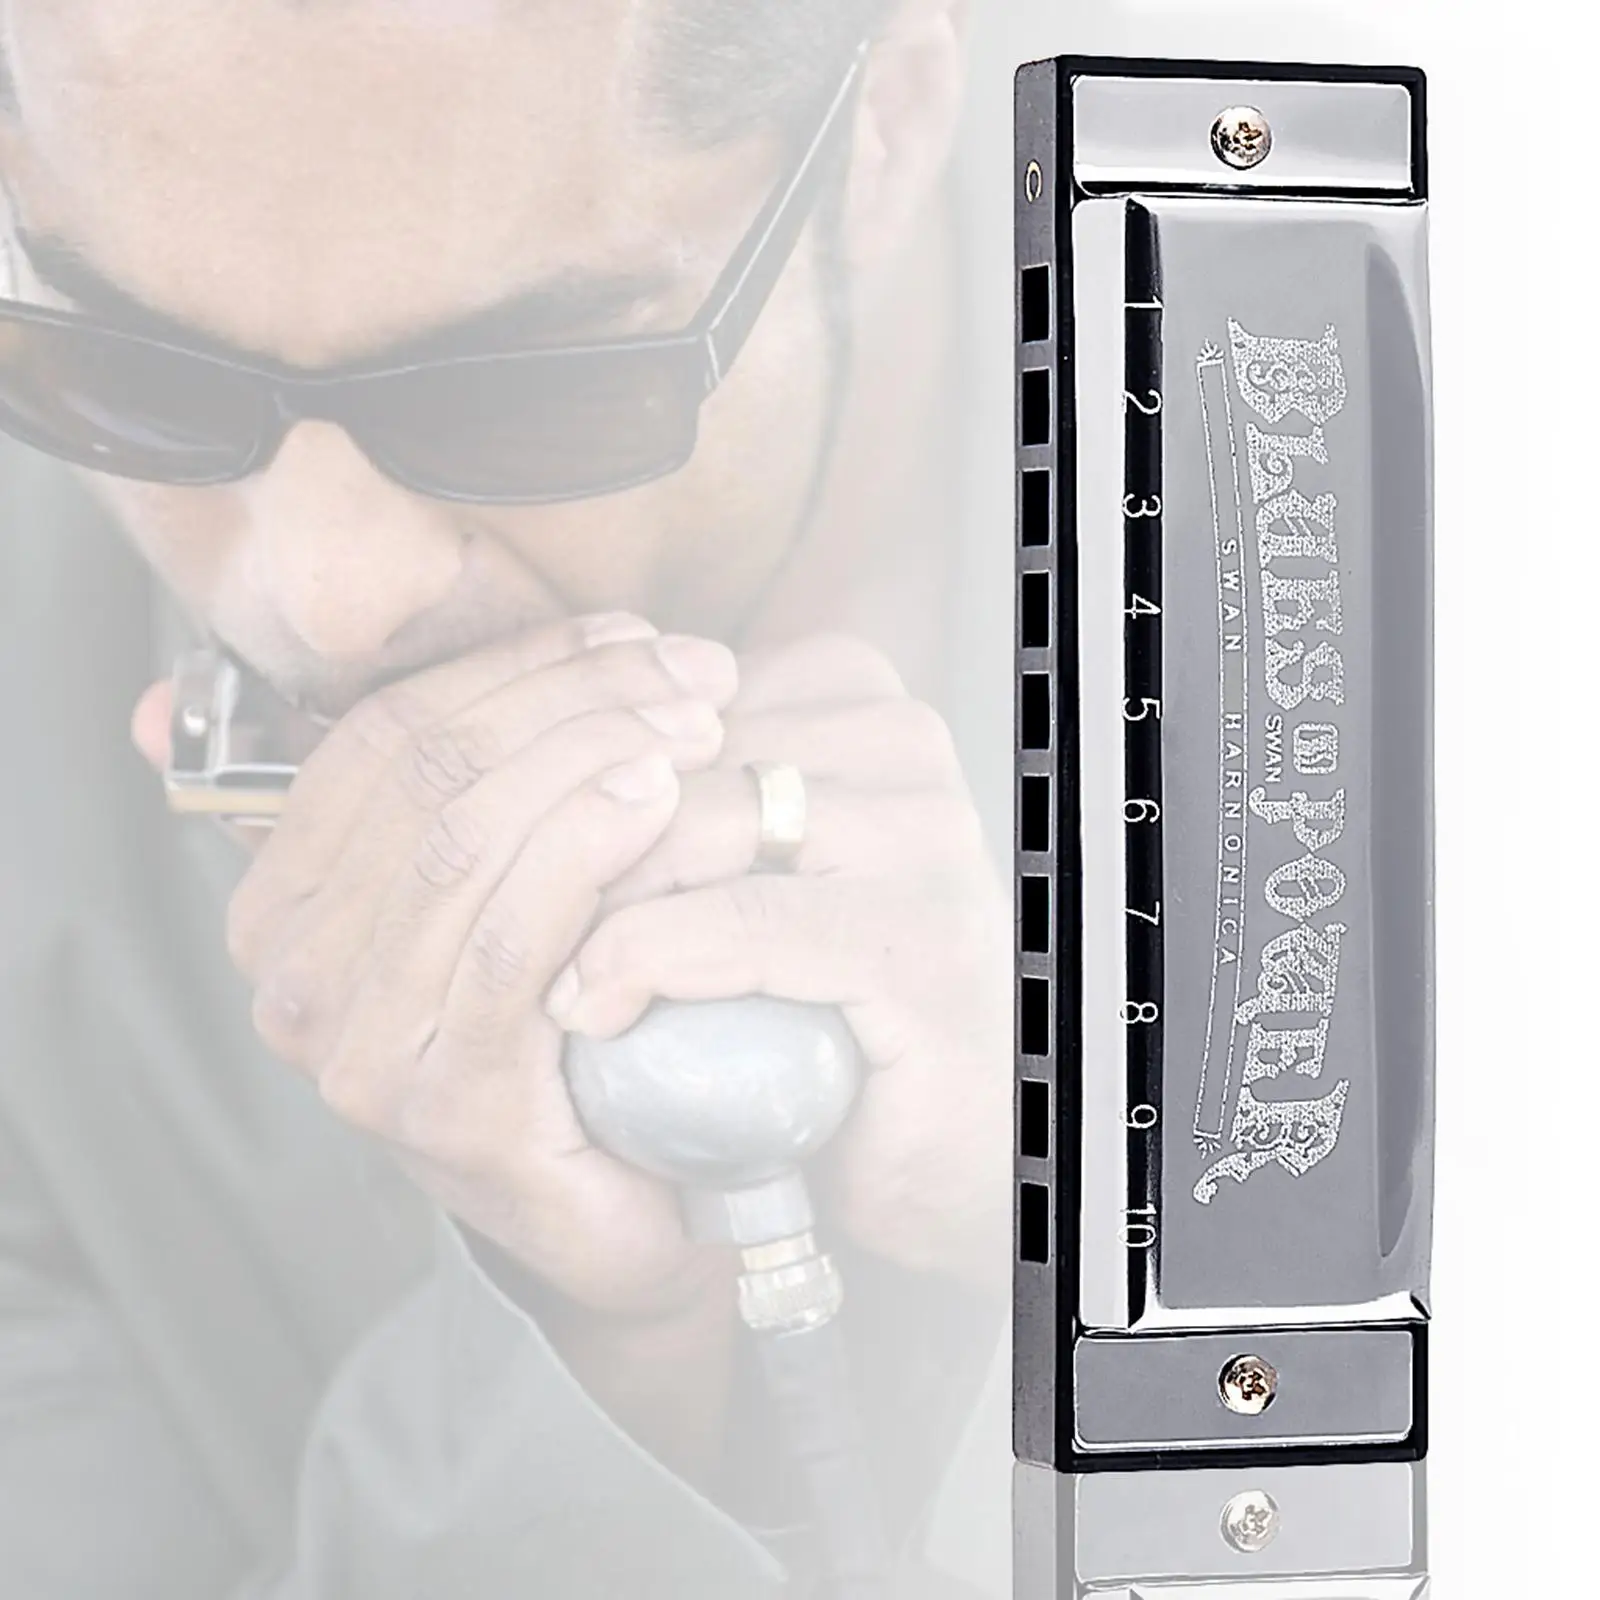 Portable Harmonica with Storage Box 10 Bores C Key 3 Octaves Mouth Organ for Music Lovers Musicians Professionals Birthday Gift